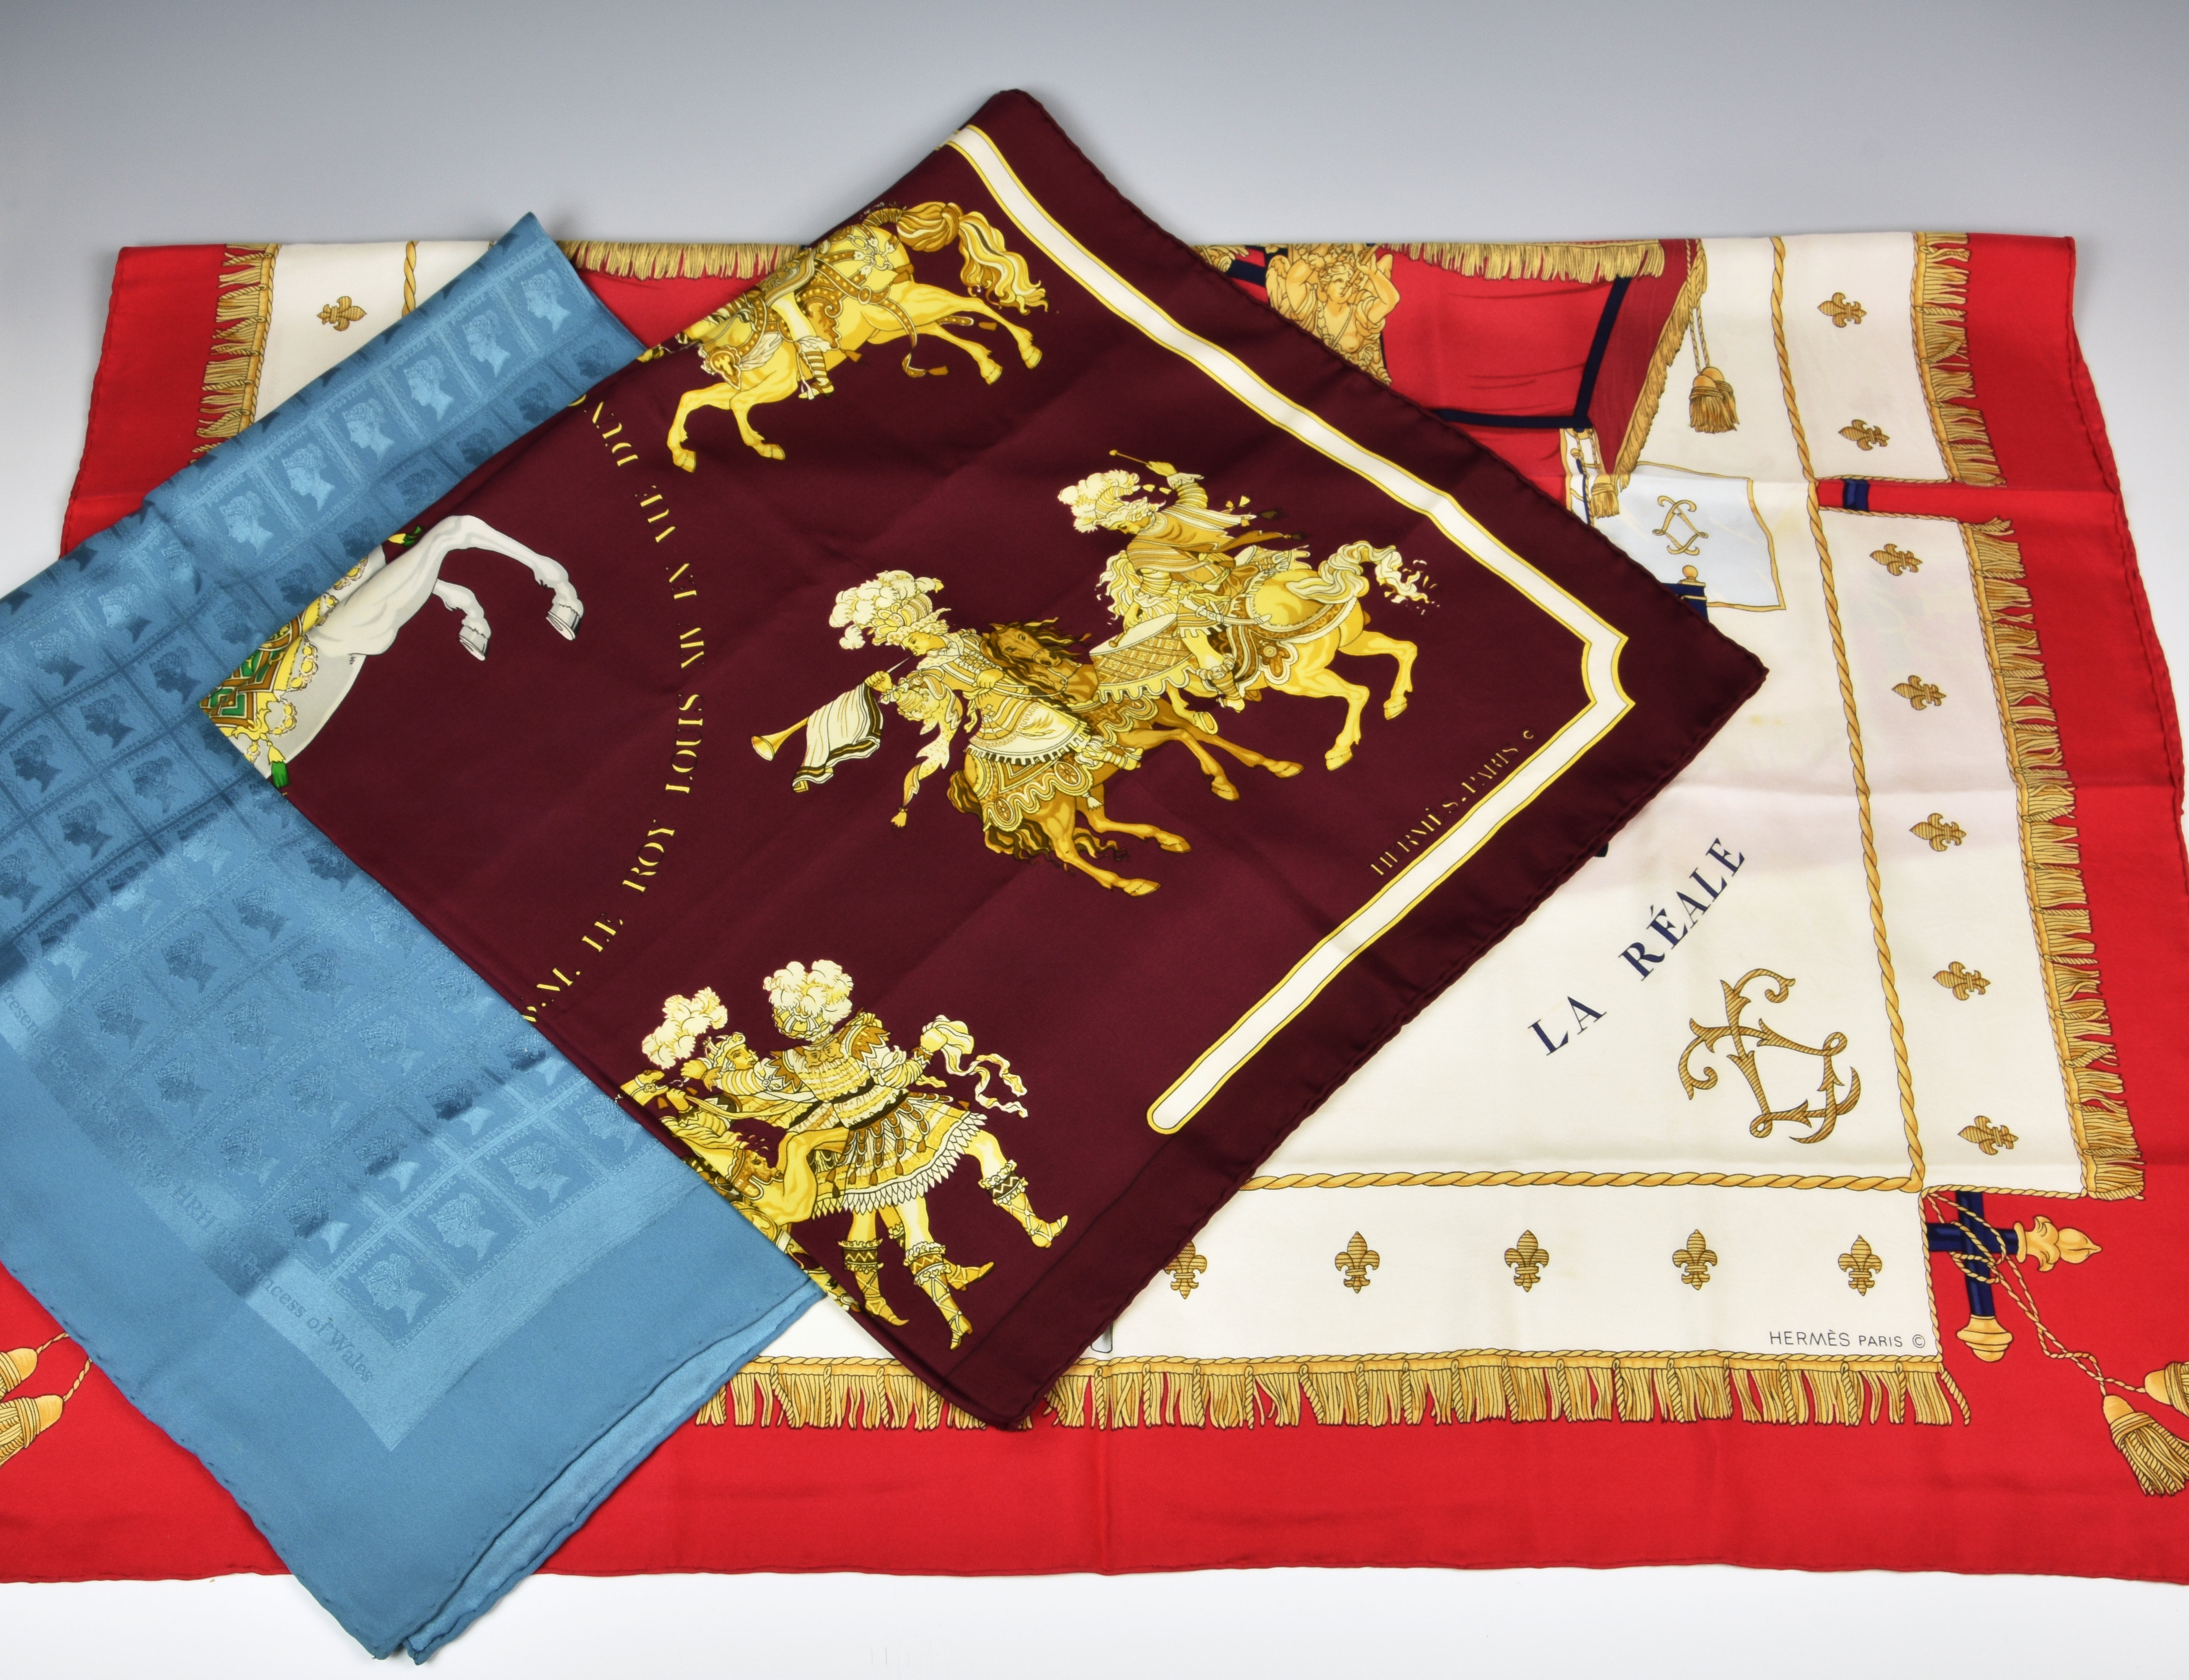 Two silk scarves by Hermes, comprising a "Carousel" scarf designed by Christine Vauxelles, 1984; and